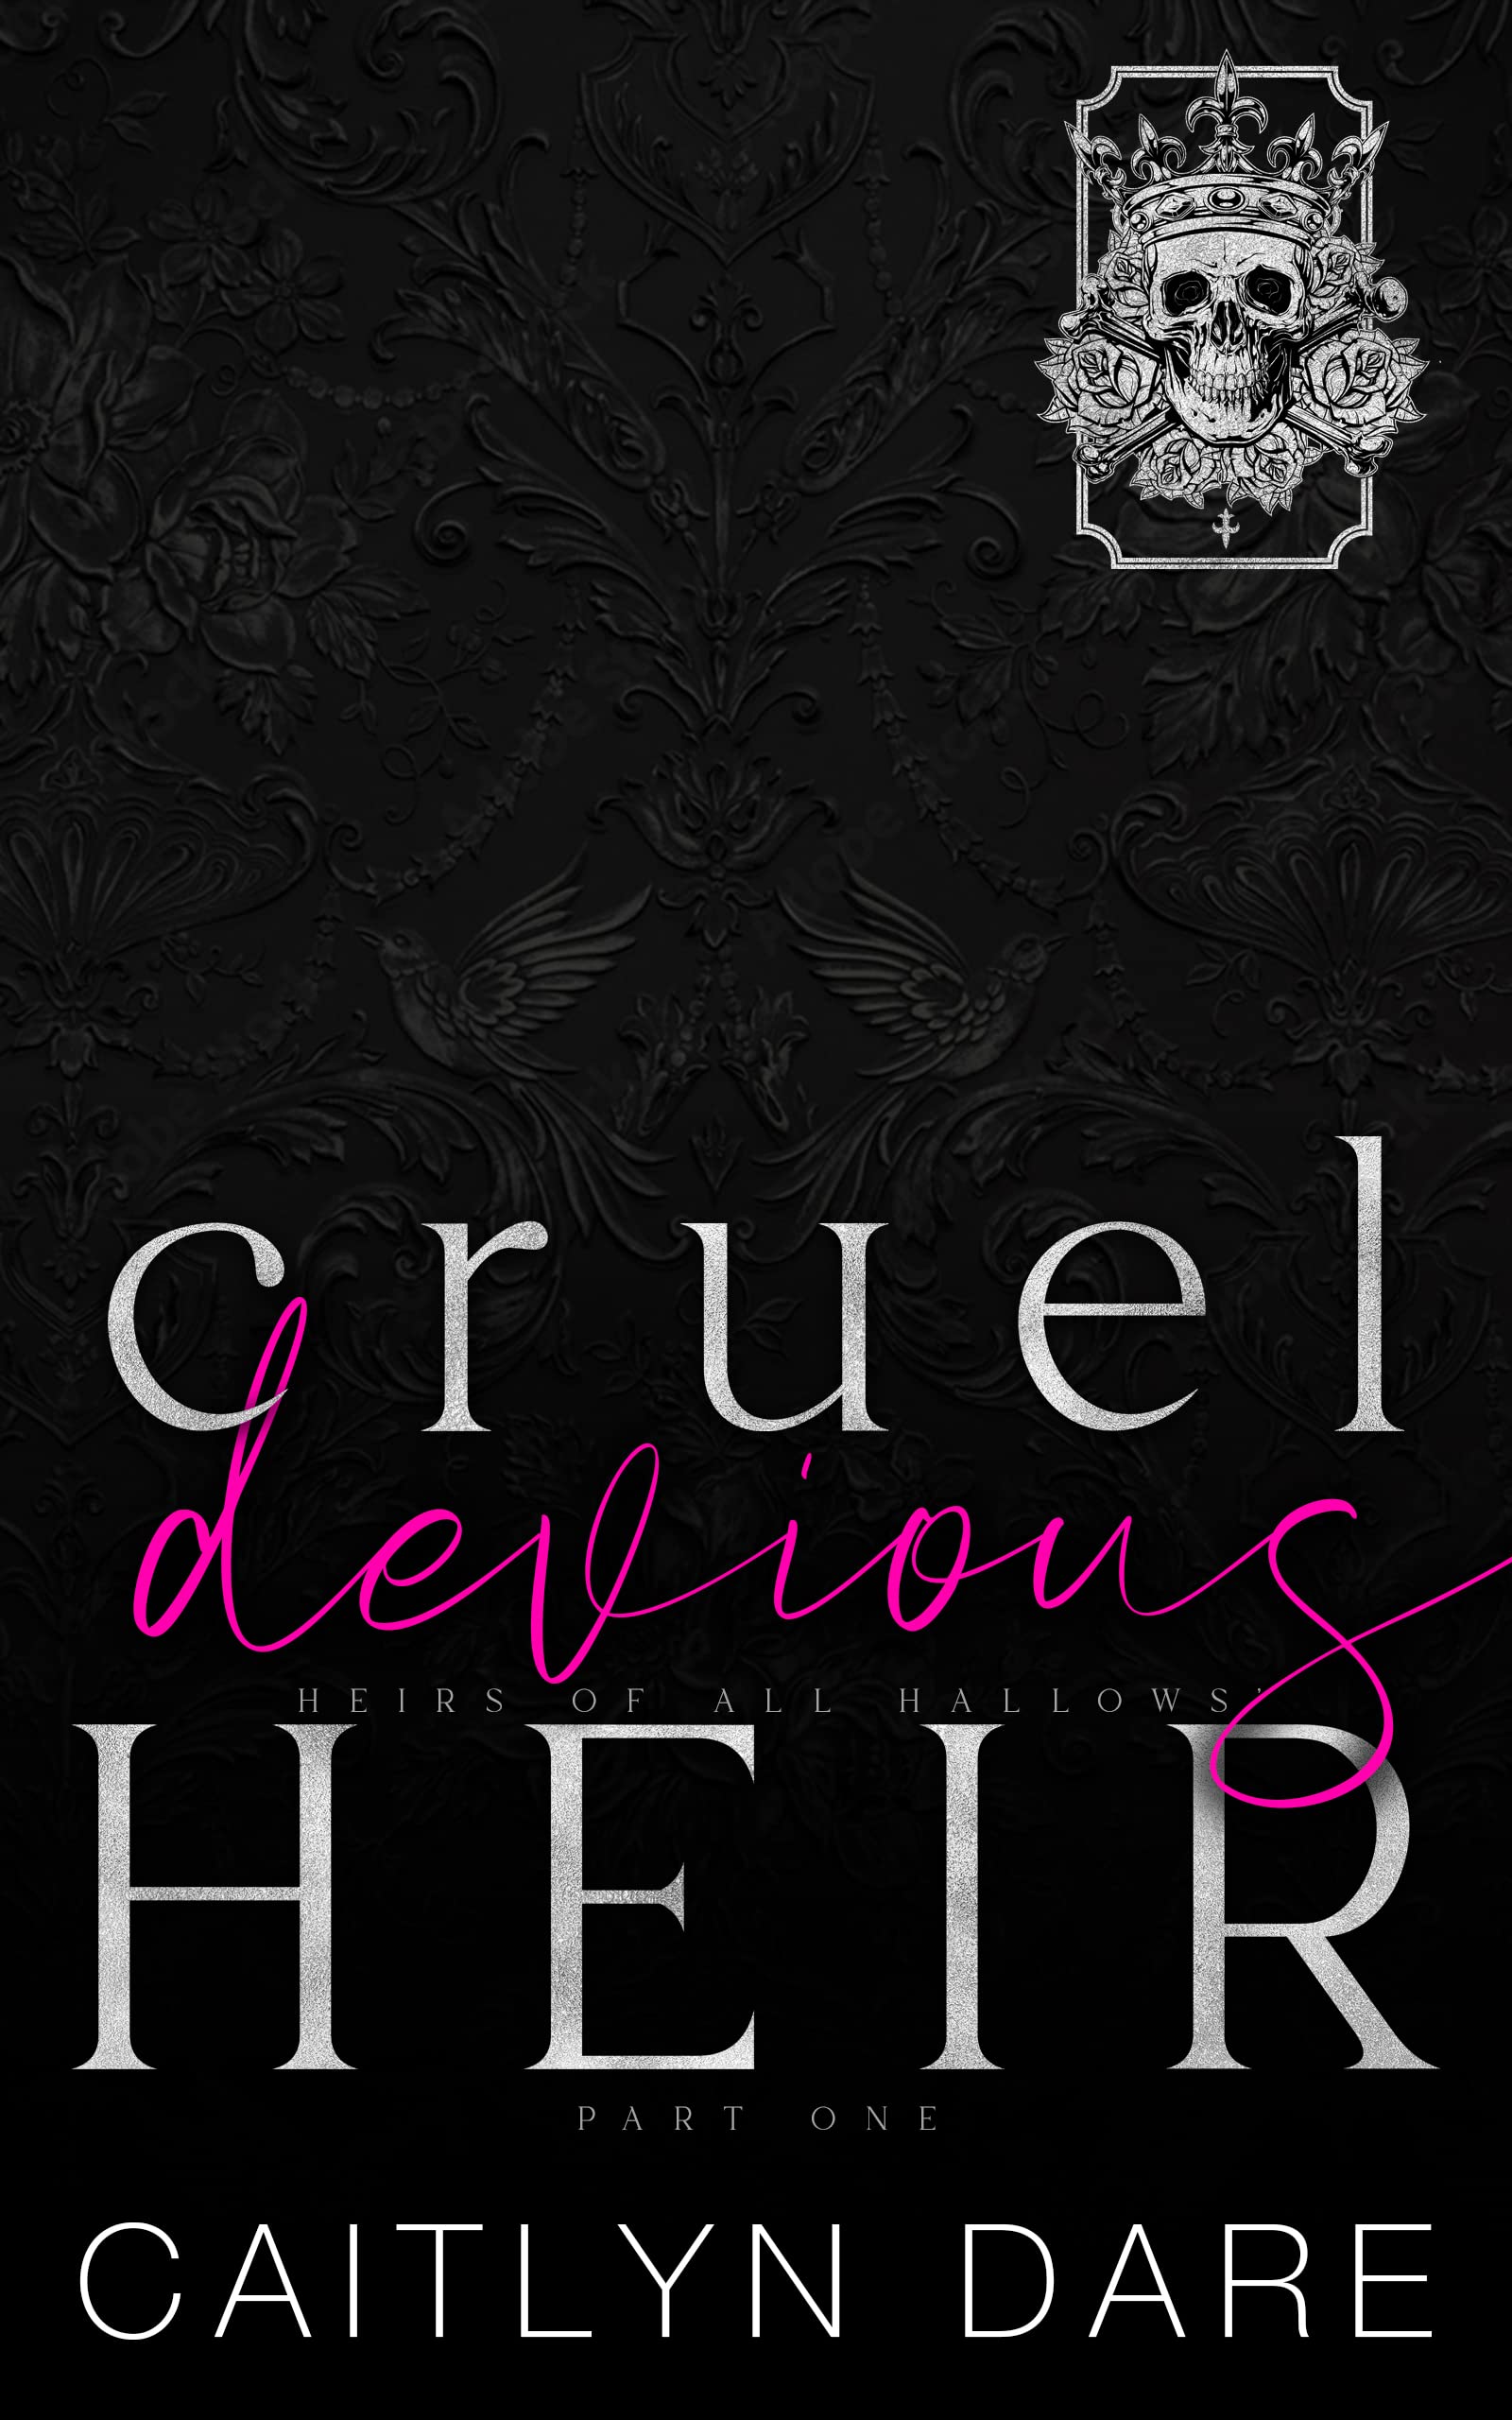 Cruel Devious Heir, Part One by Caitlyn Dare PDF Download